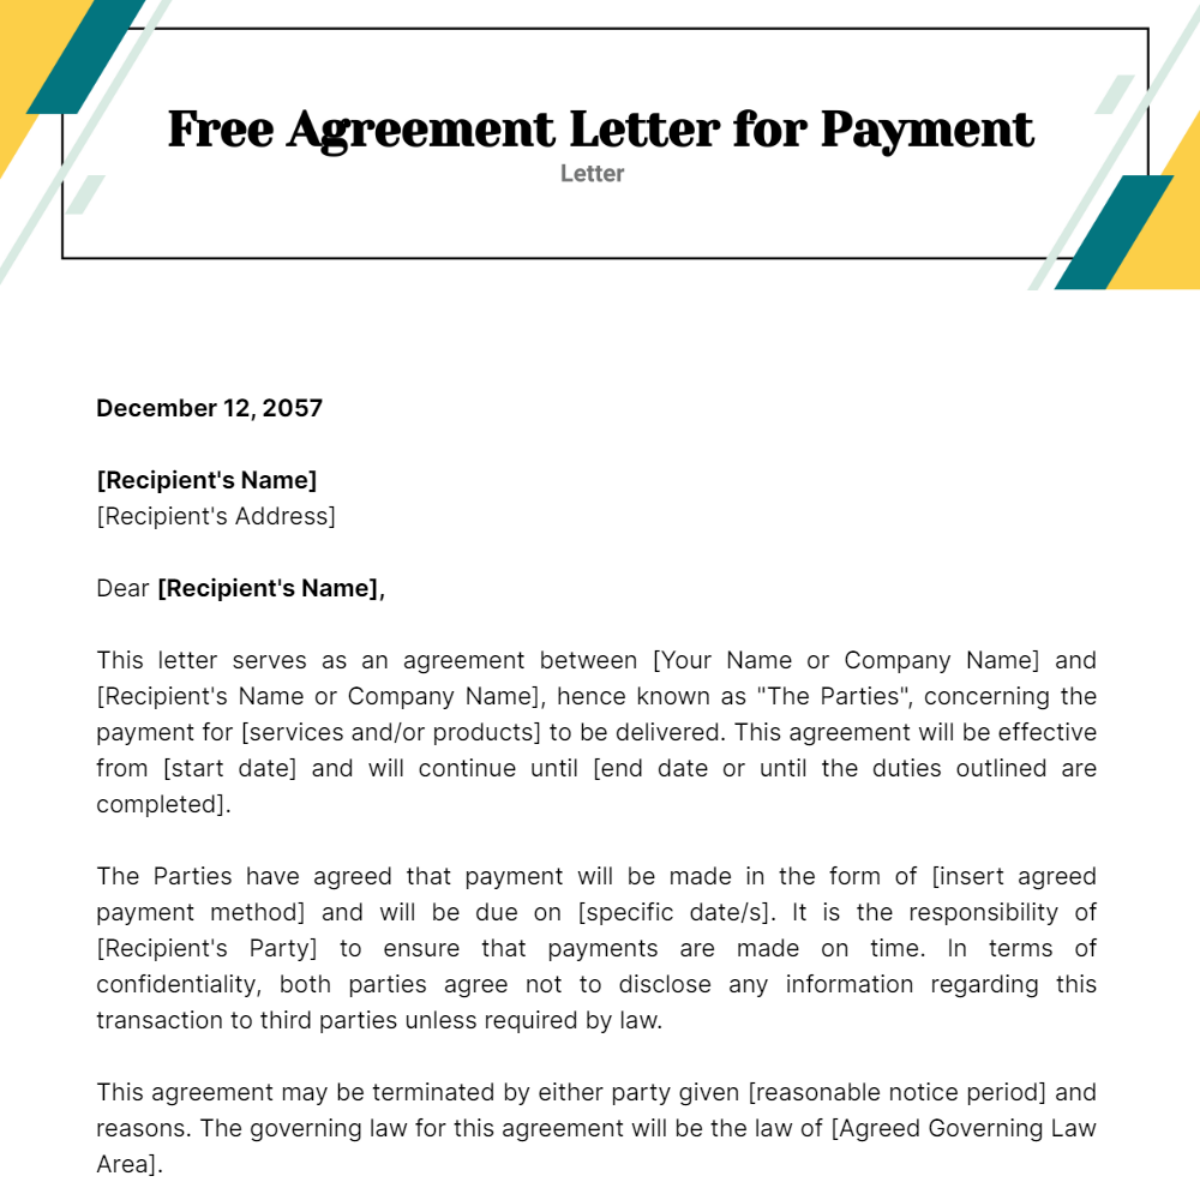 Agreement Letter for Payment Template